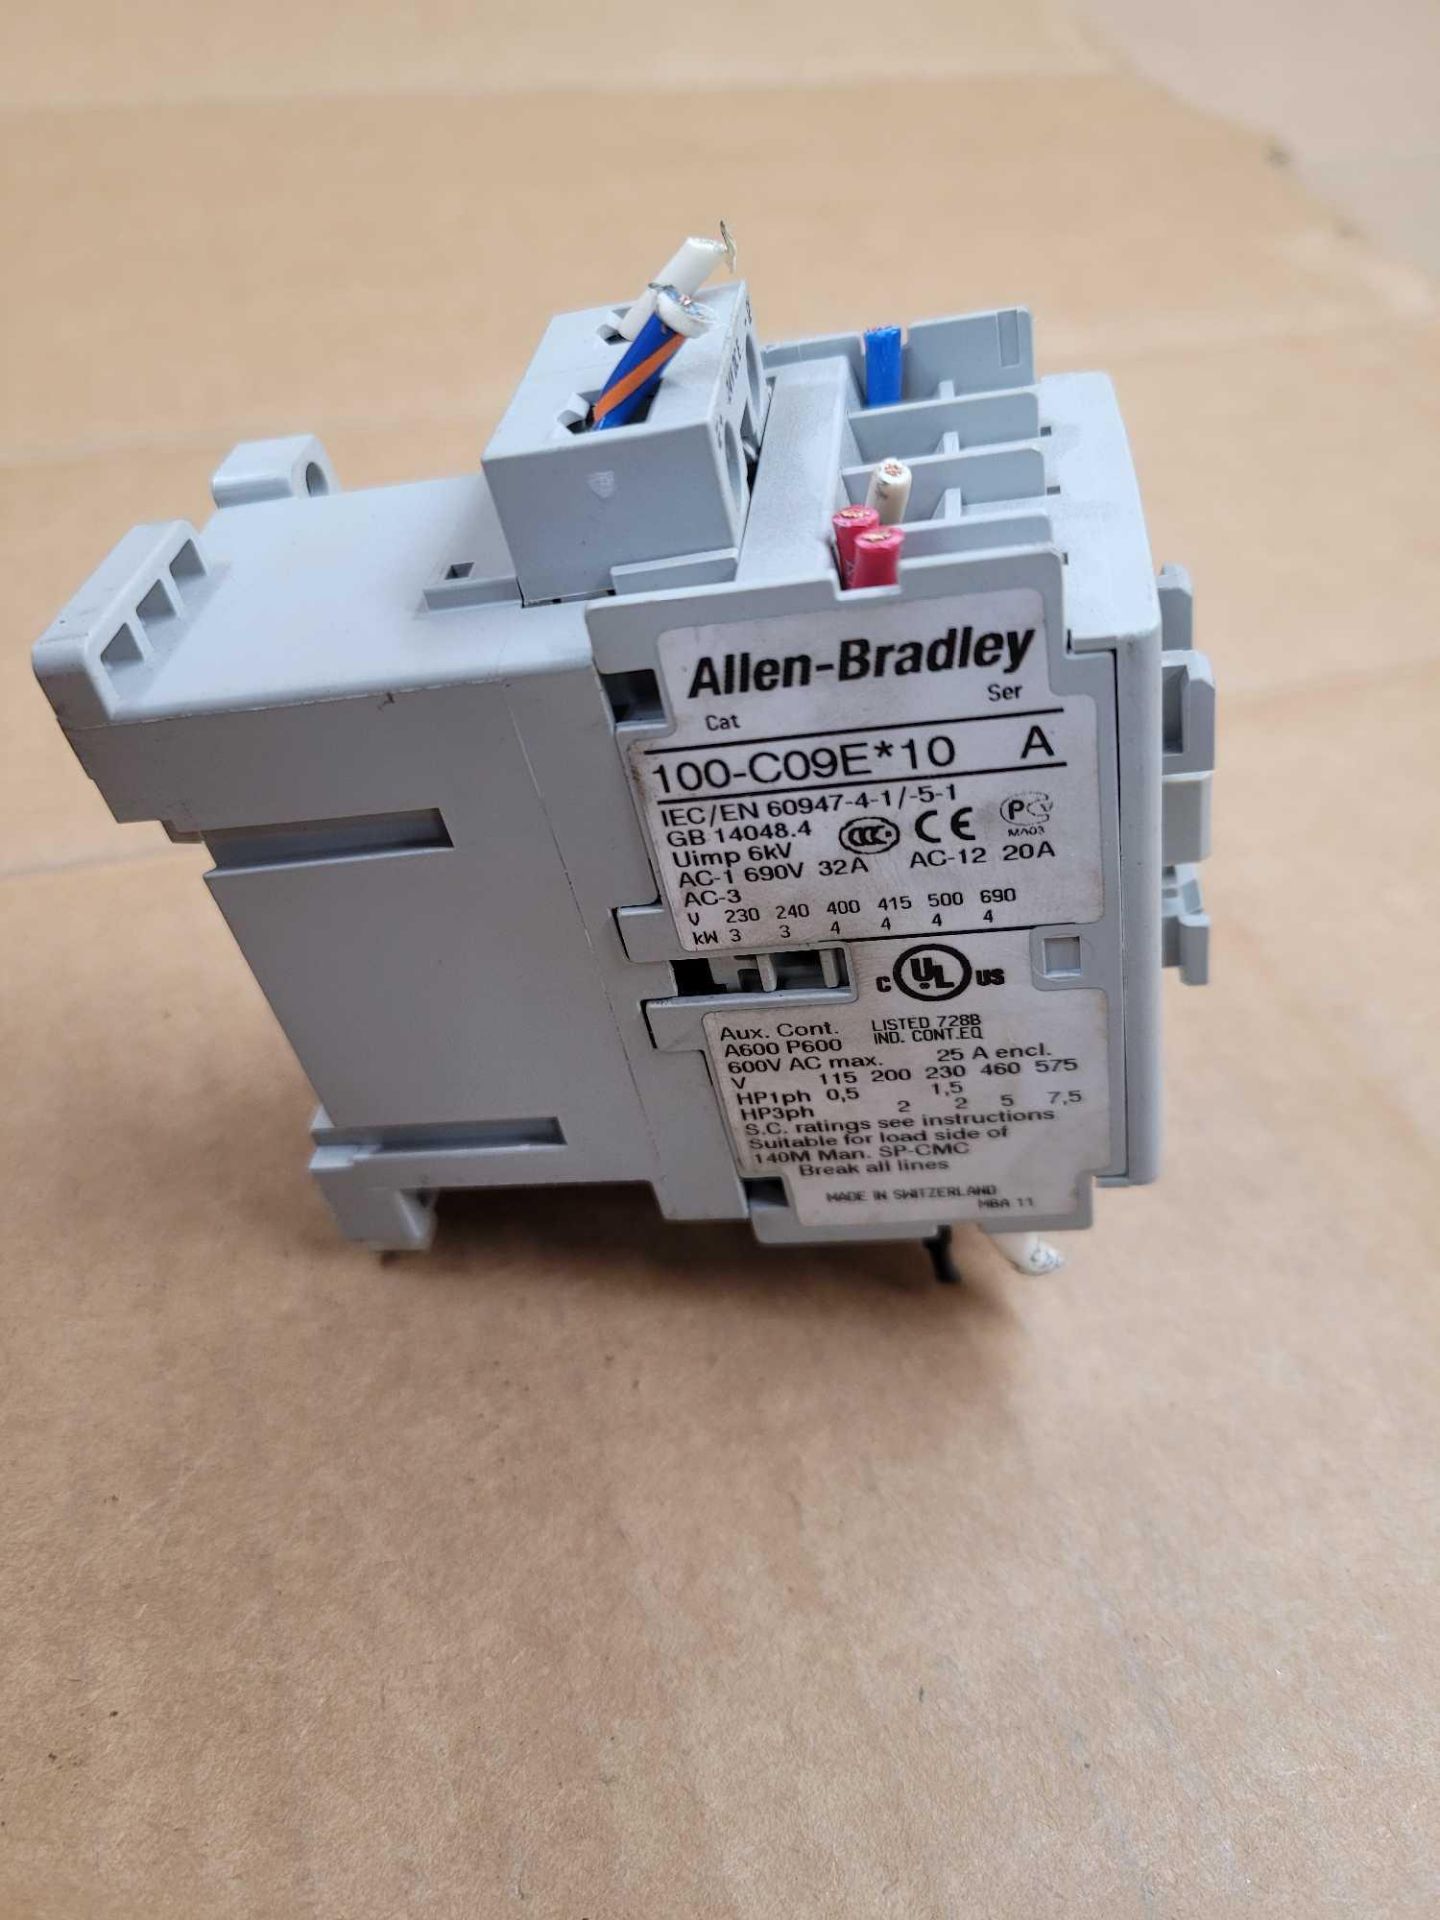 LOT OF 6 ALLEN BRADLEY 100-C09E*10 / Series A Contactor  /  Lot Weight: 5.2 lbs - Image 4 of 8